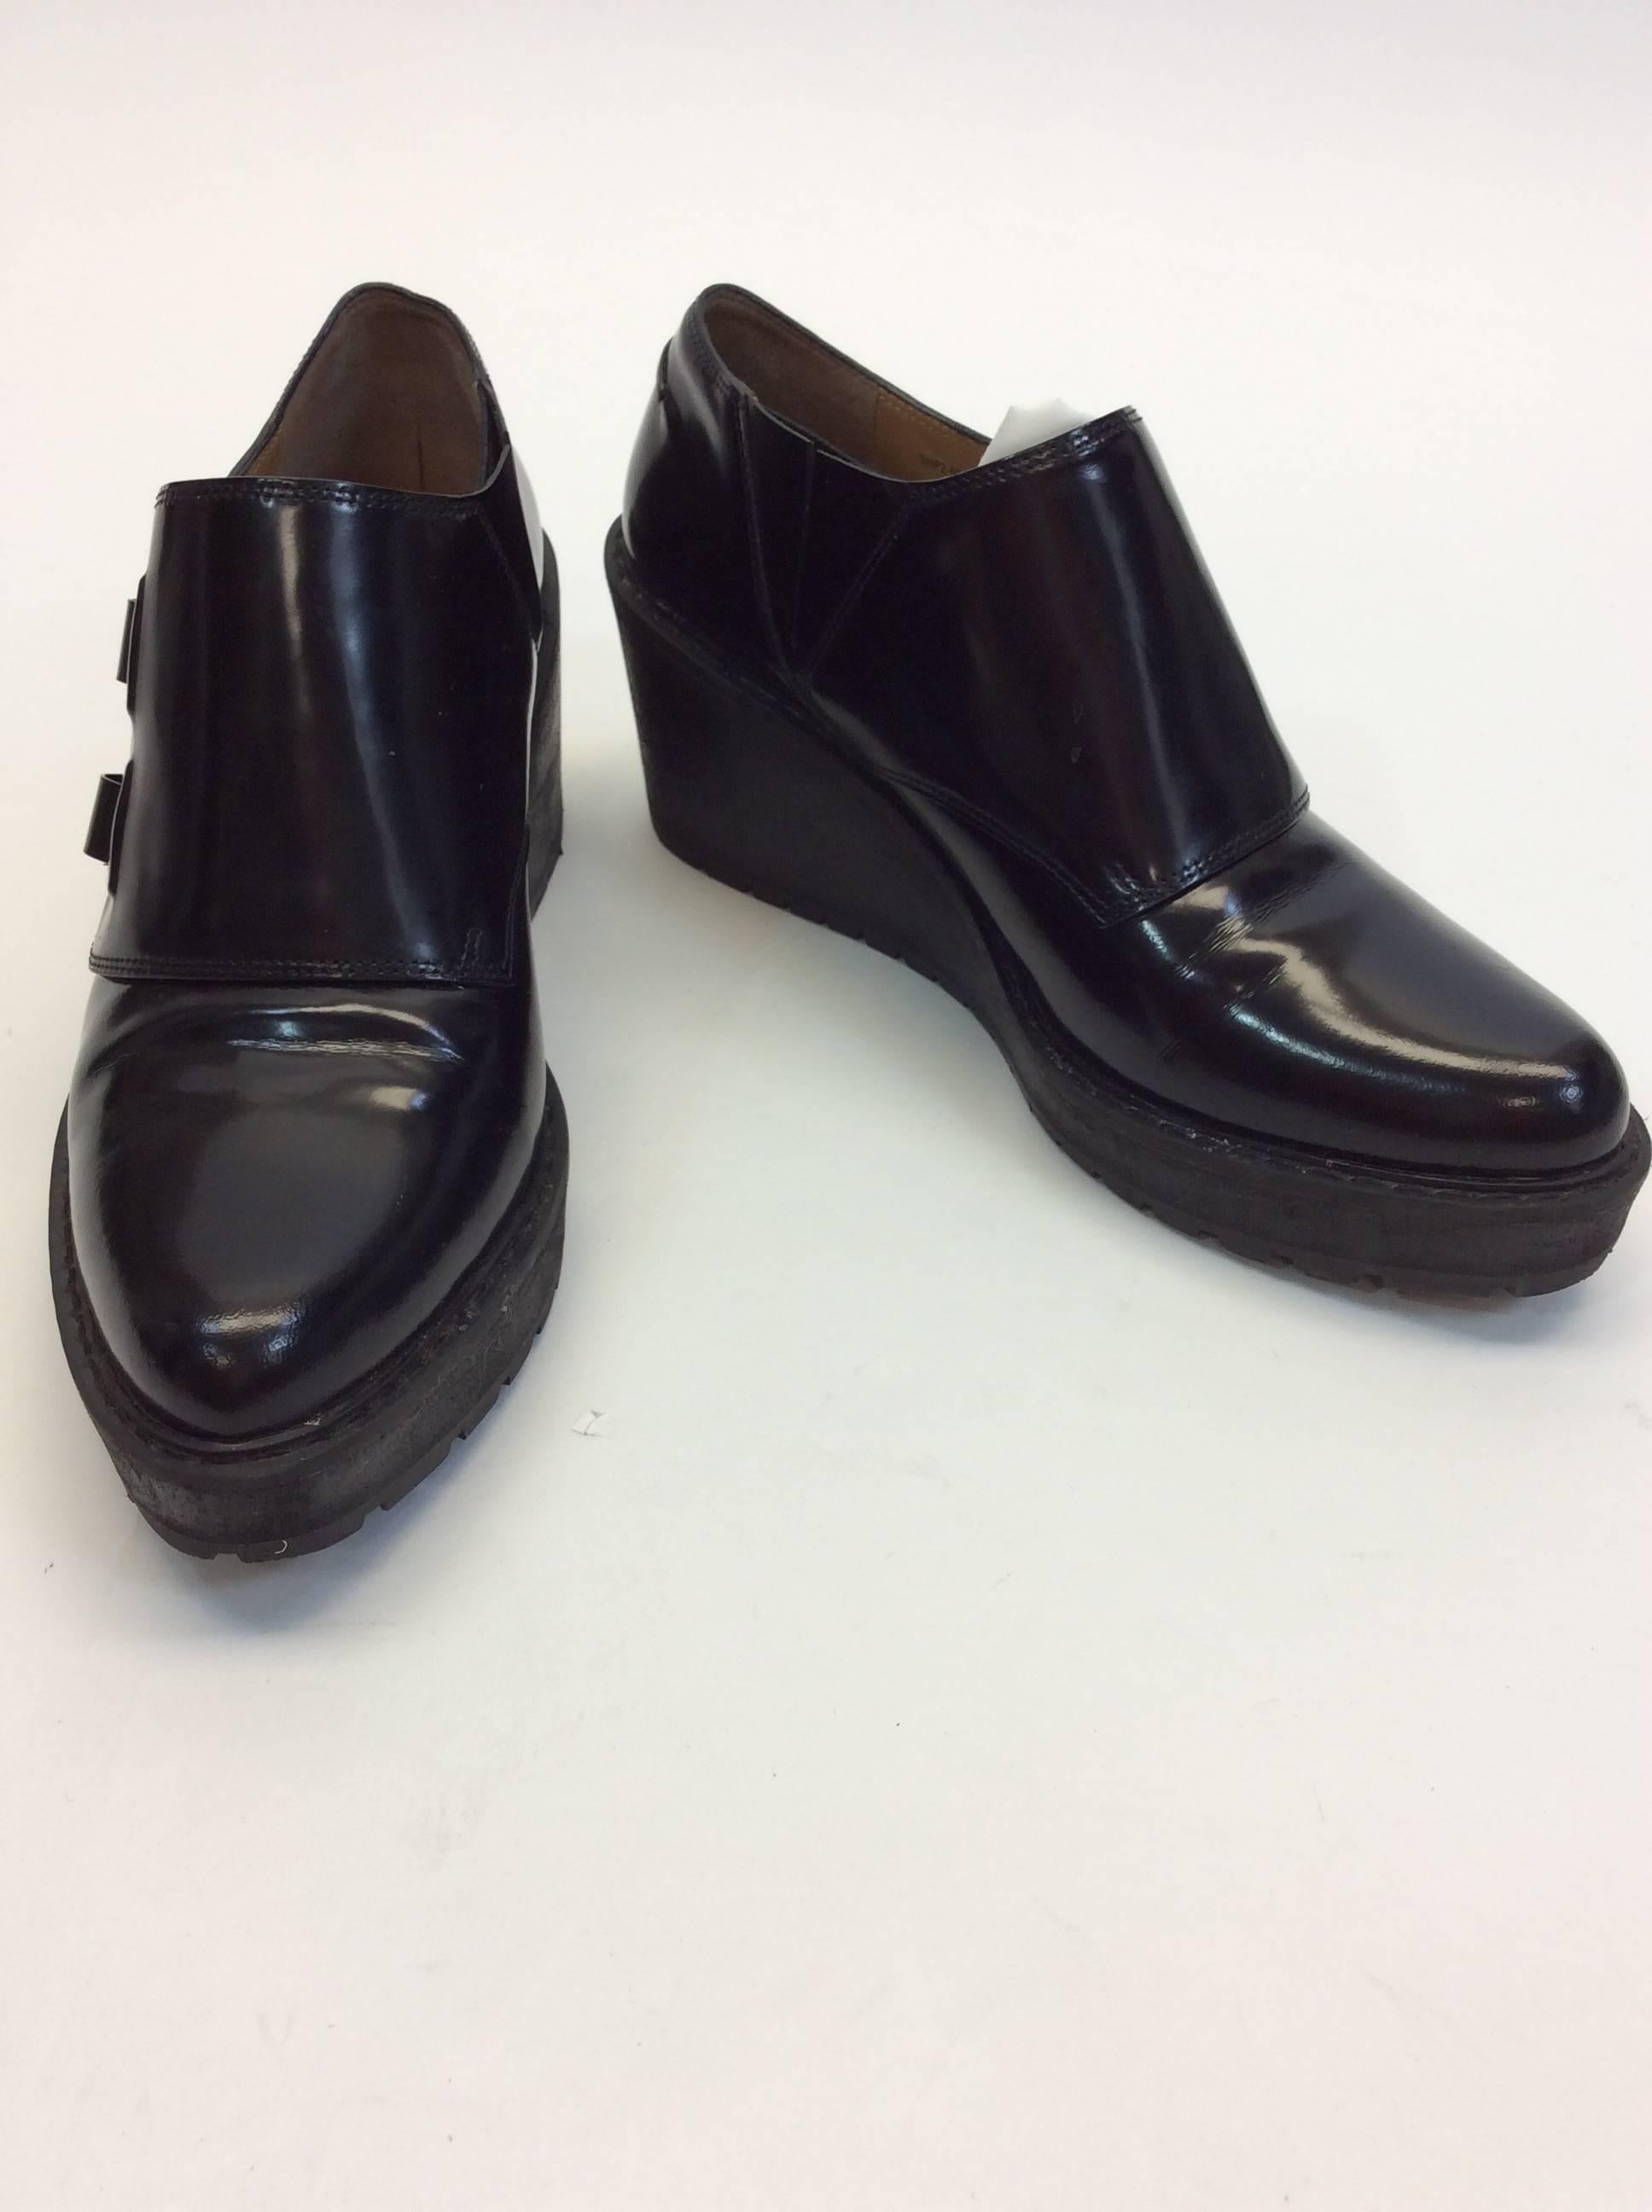 Black Patent Leather
Includes Dust Bag
Clasps on Sides for Closure
Rubber Soles
3" Inch Heel
4" Inch Sole
Original Price: $525.00